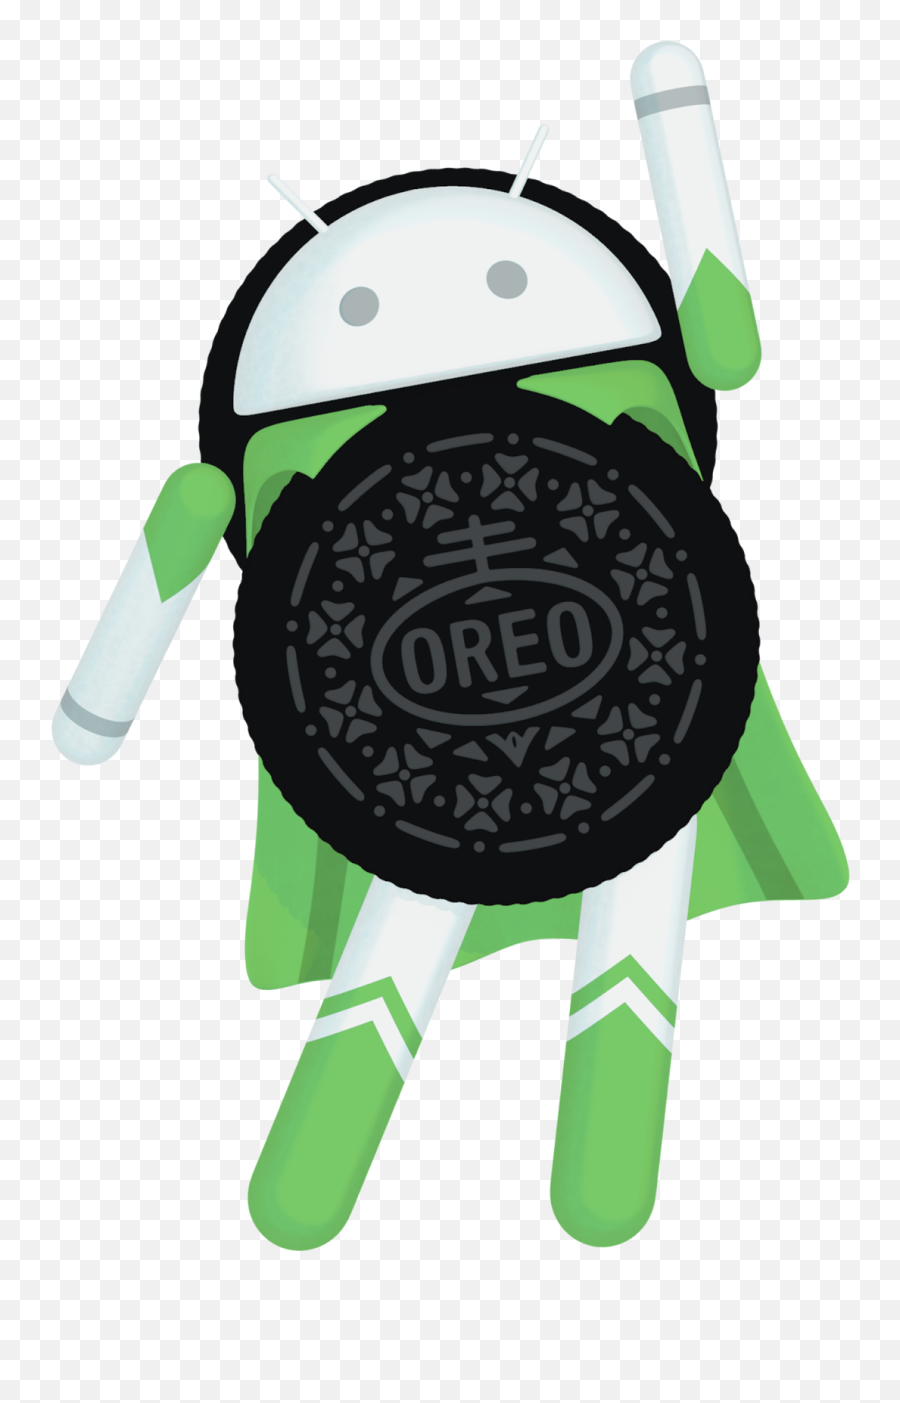 Introducing Android 8 - Oreo Android Emoji,Android Emoji Update 2017